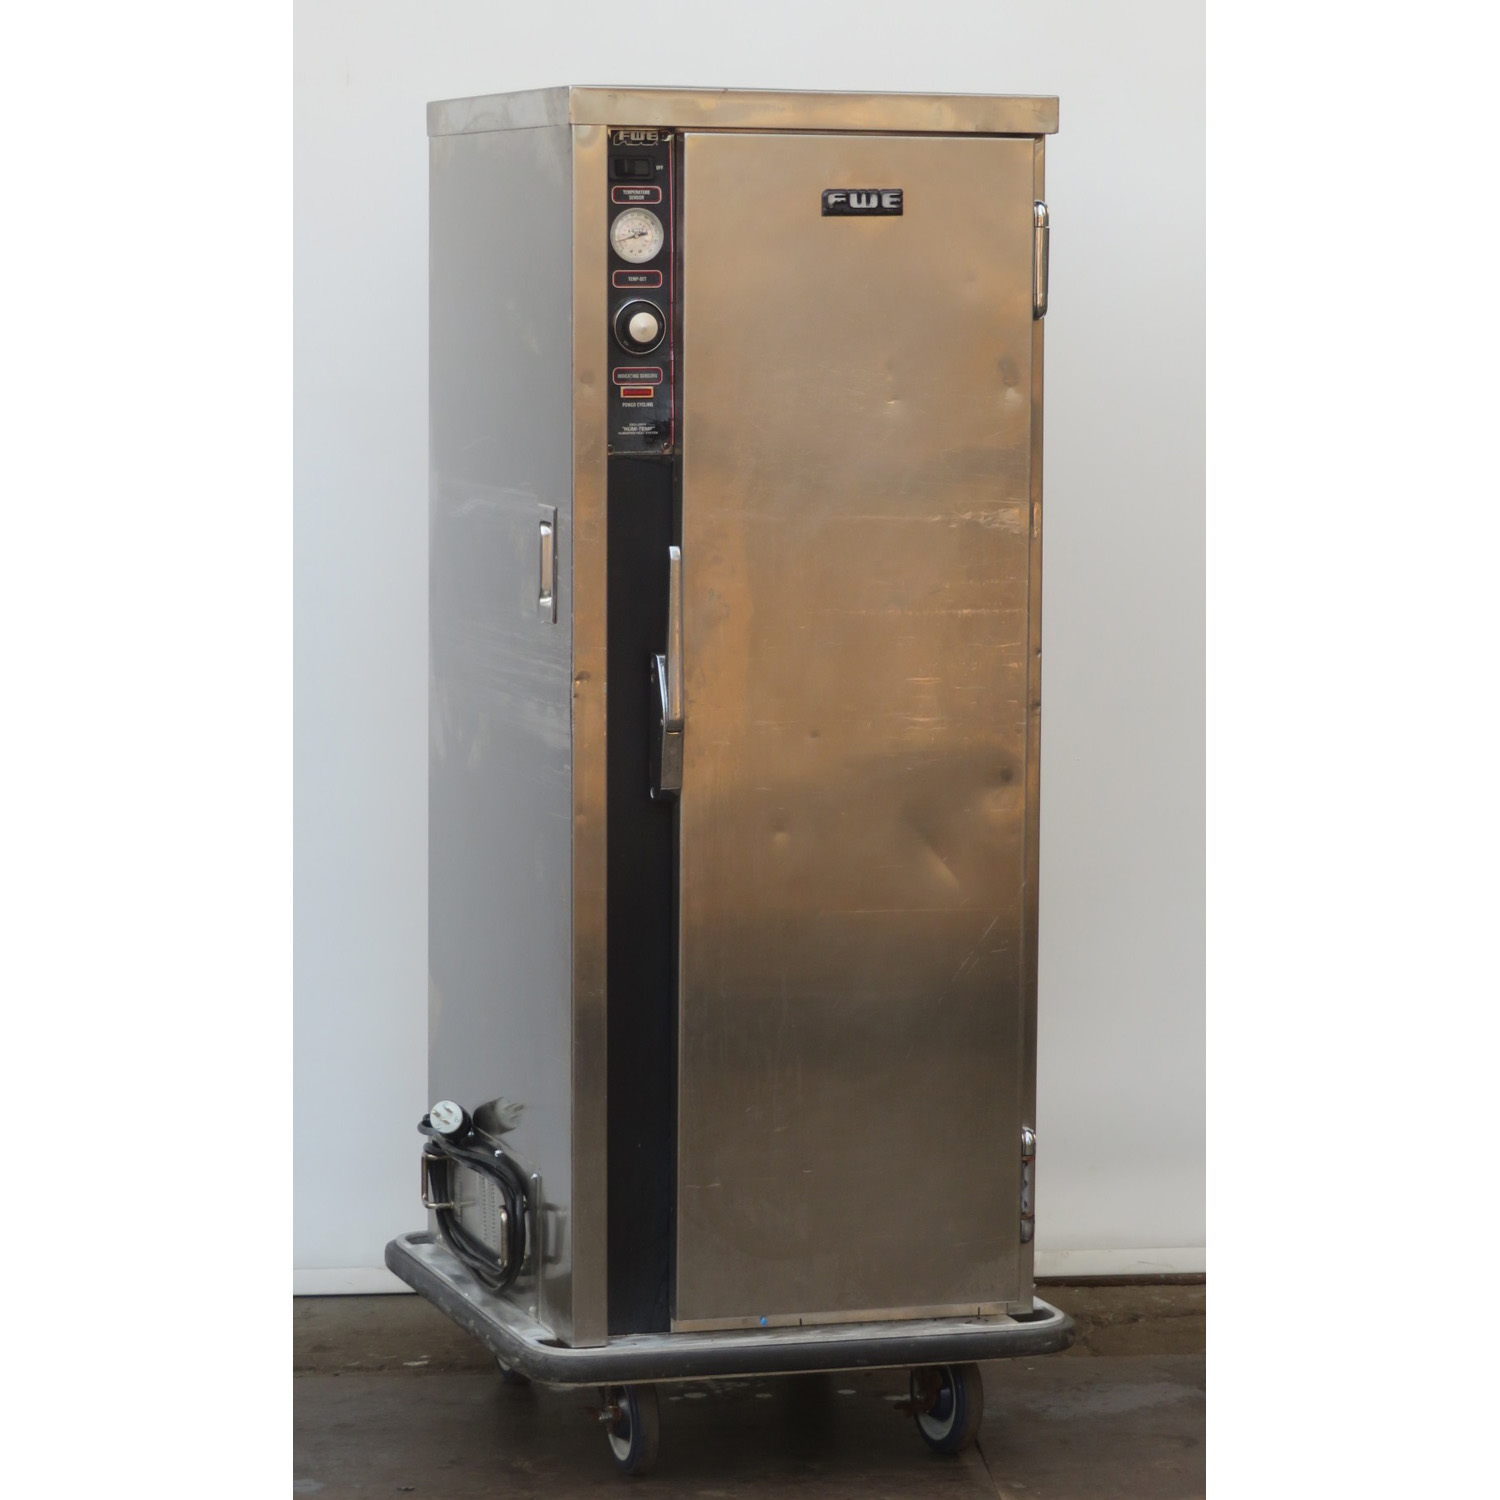 FWE PS-1220-15 Full Height Insulated Mobile Heated Cabinet, Used Excellent Condition